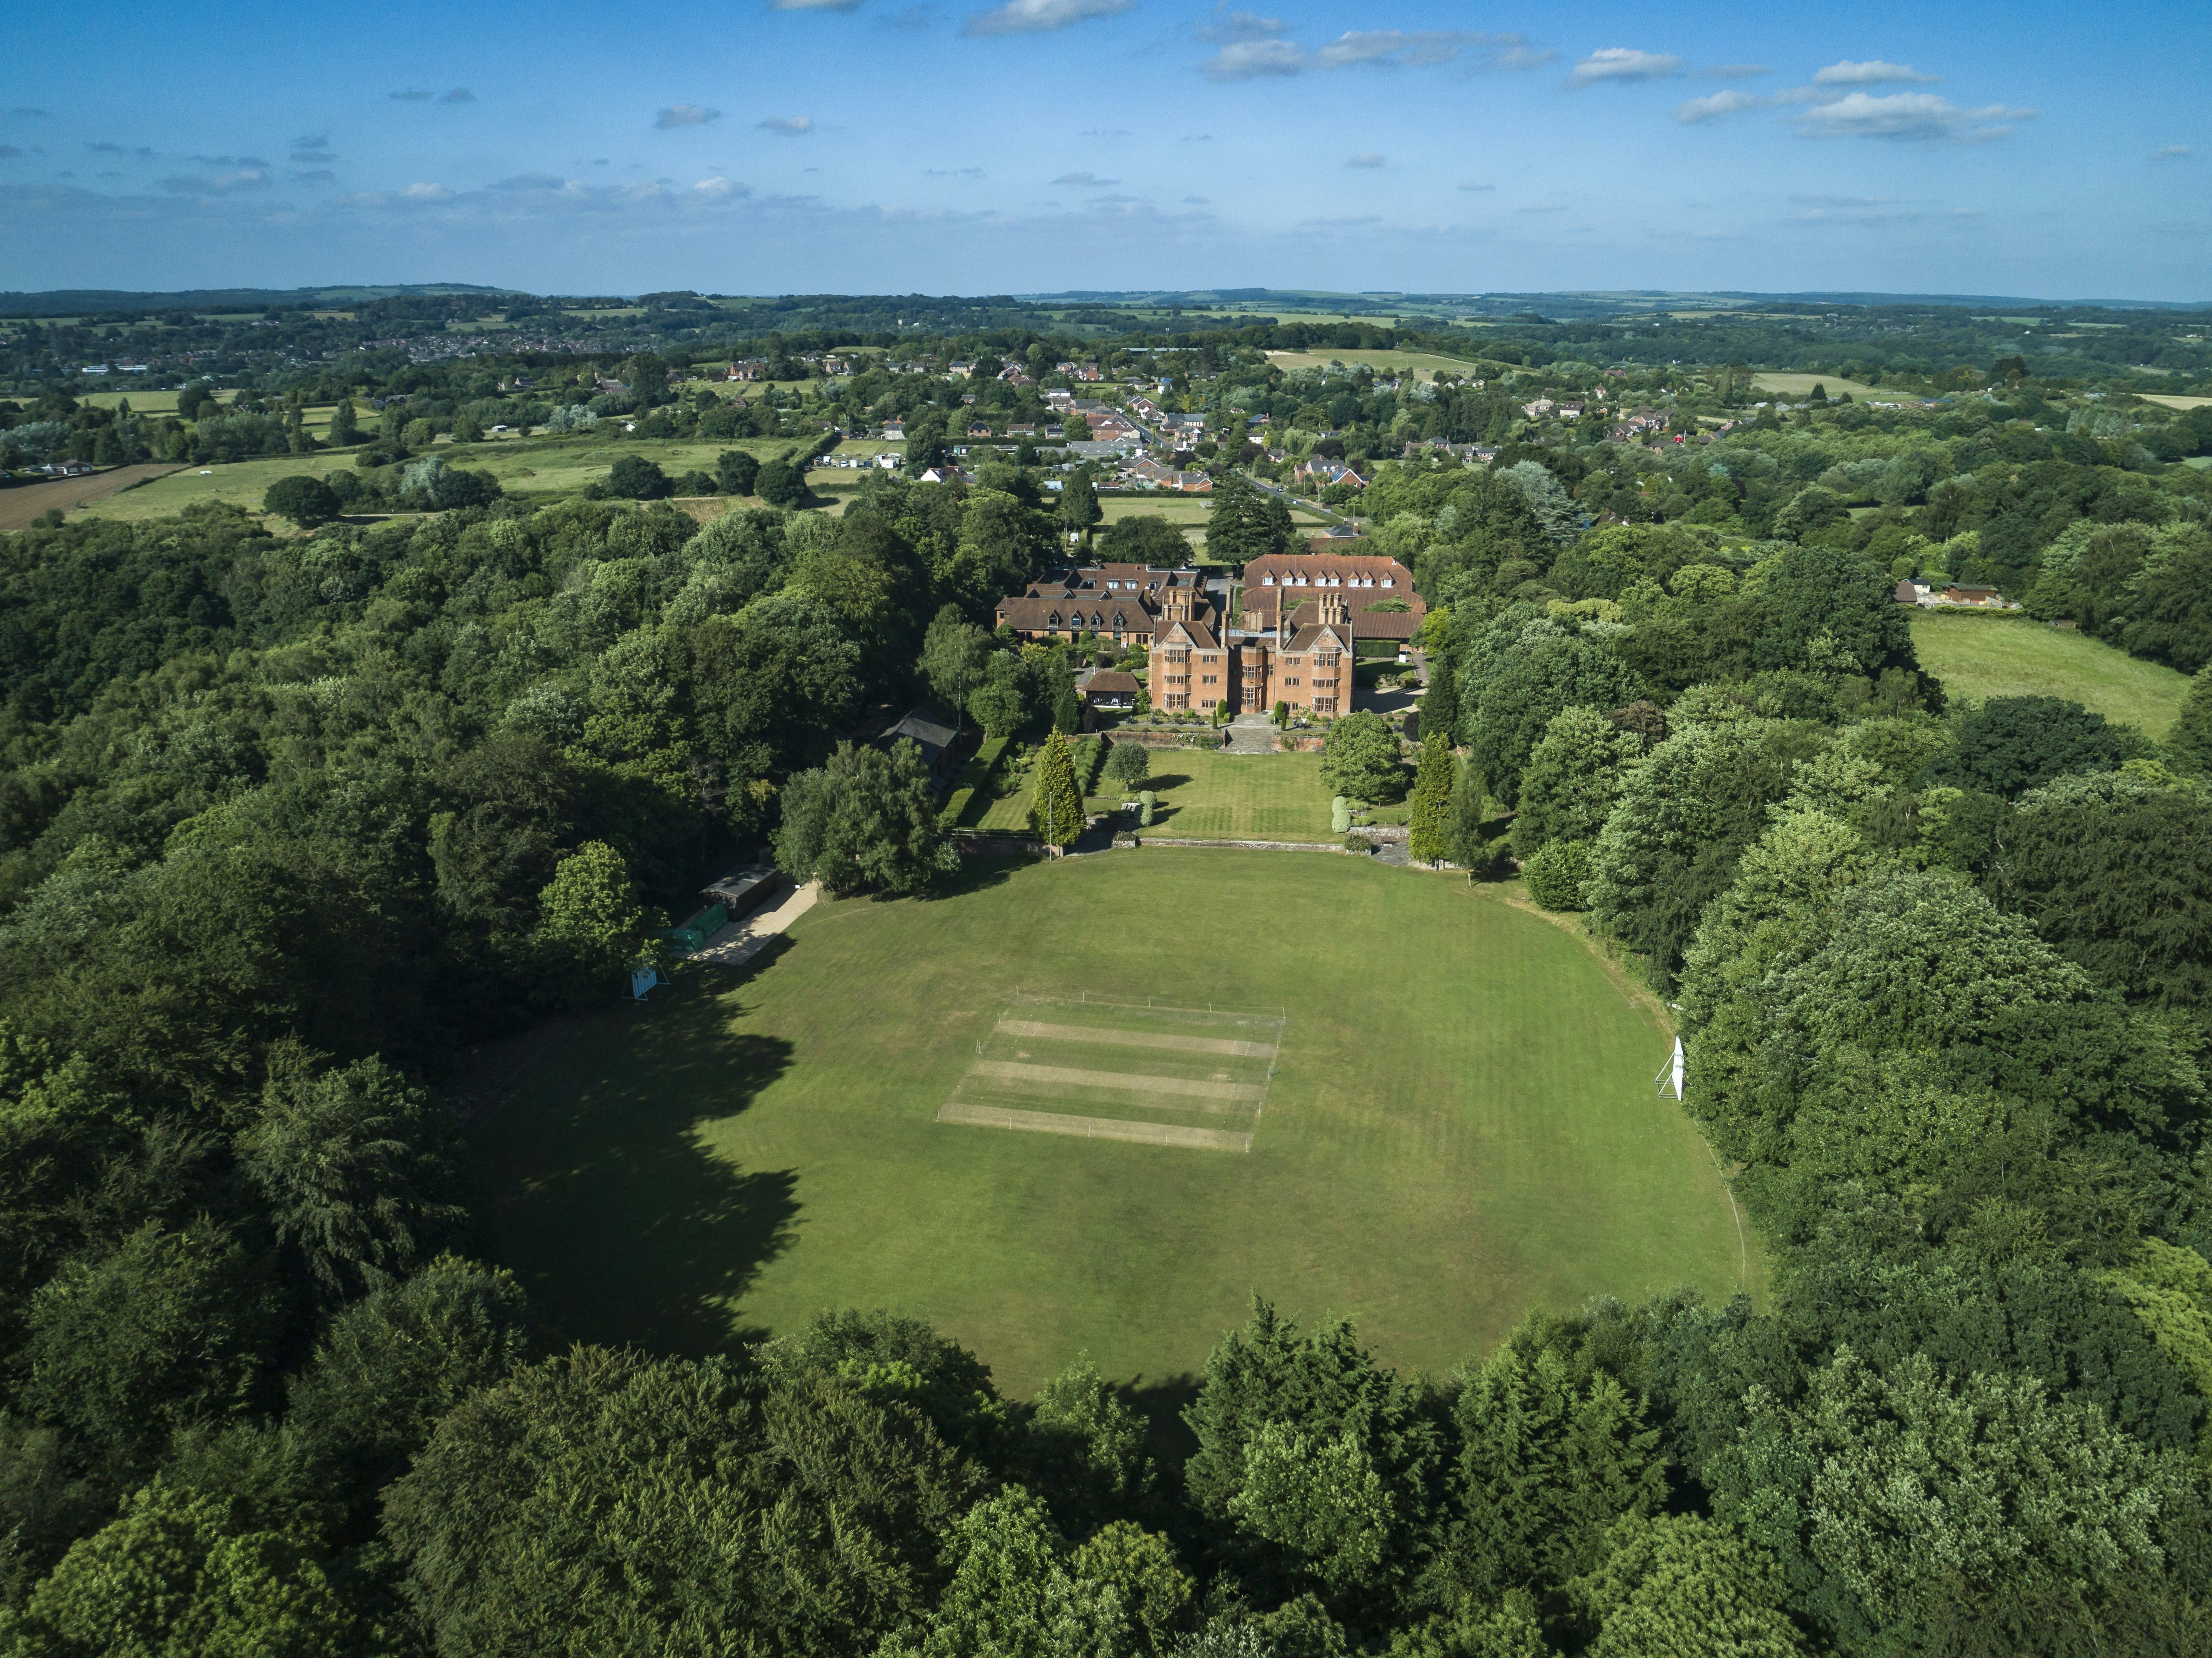 New Place Hotel - Hampshire - The Cricket Pitch image 3